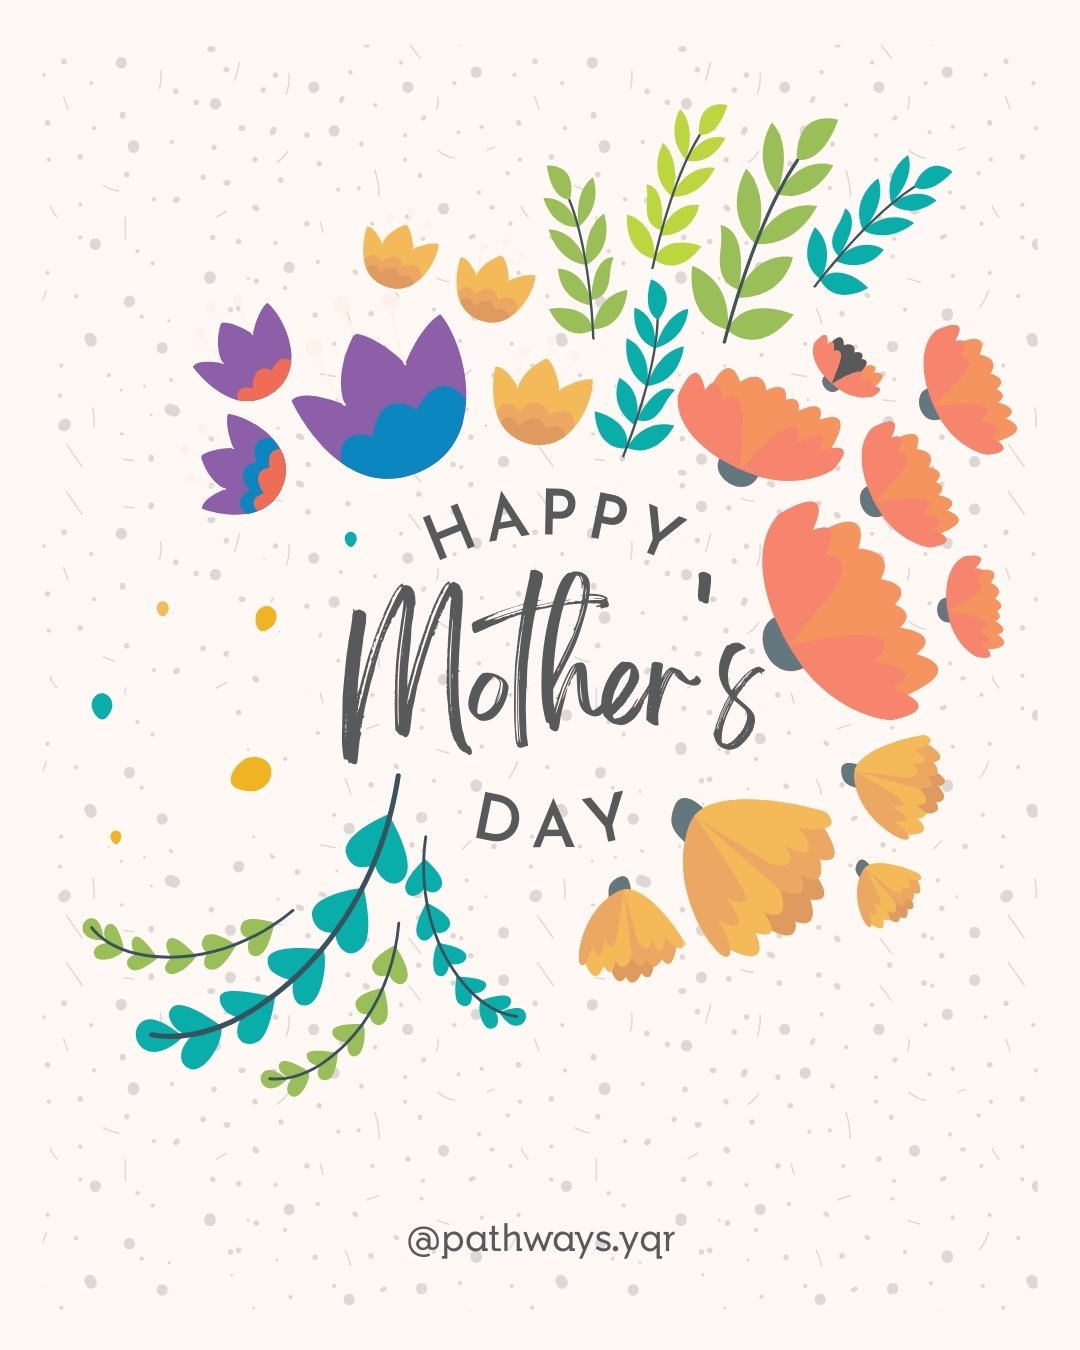 Wishing a Happy Mother's Day to all mothers, mother-figures, moms-to-be, and those wishing to be moms. May your day be anything and everything that you need it to be in order to feel celebrated. 🌷☀️🧡

~the Pathways team